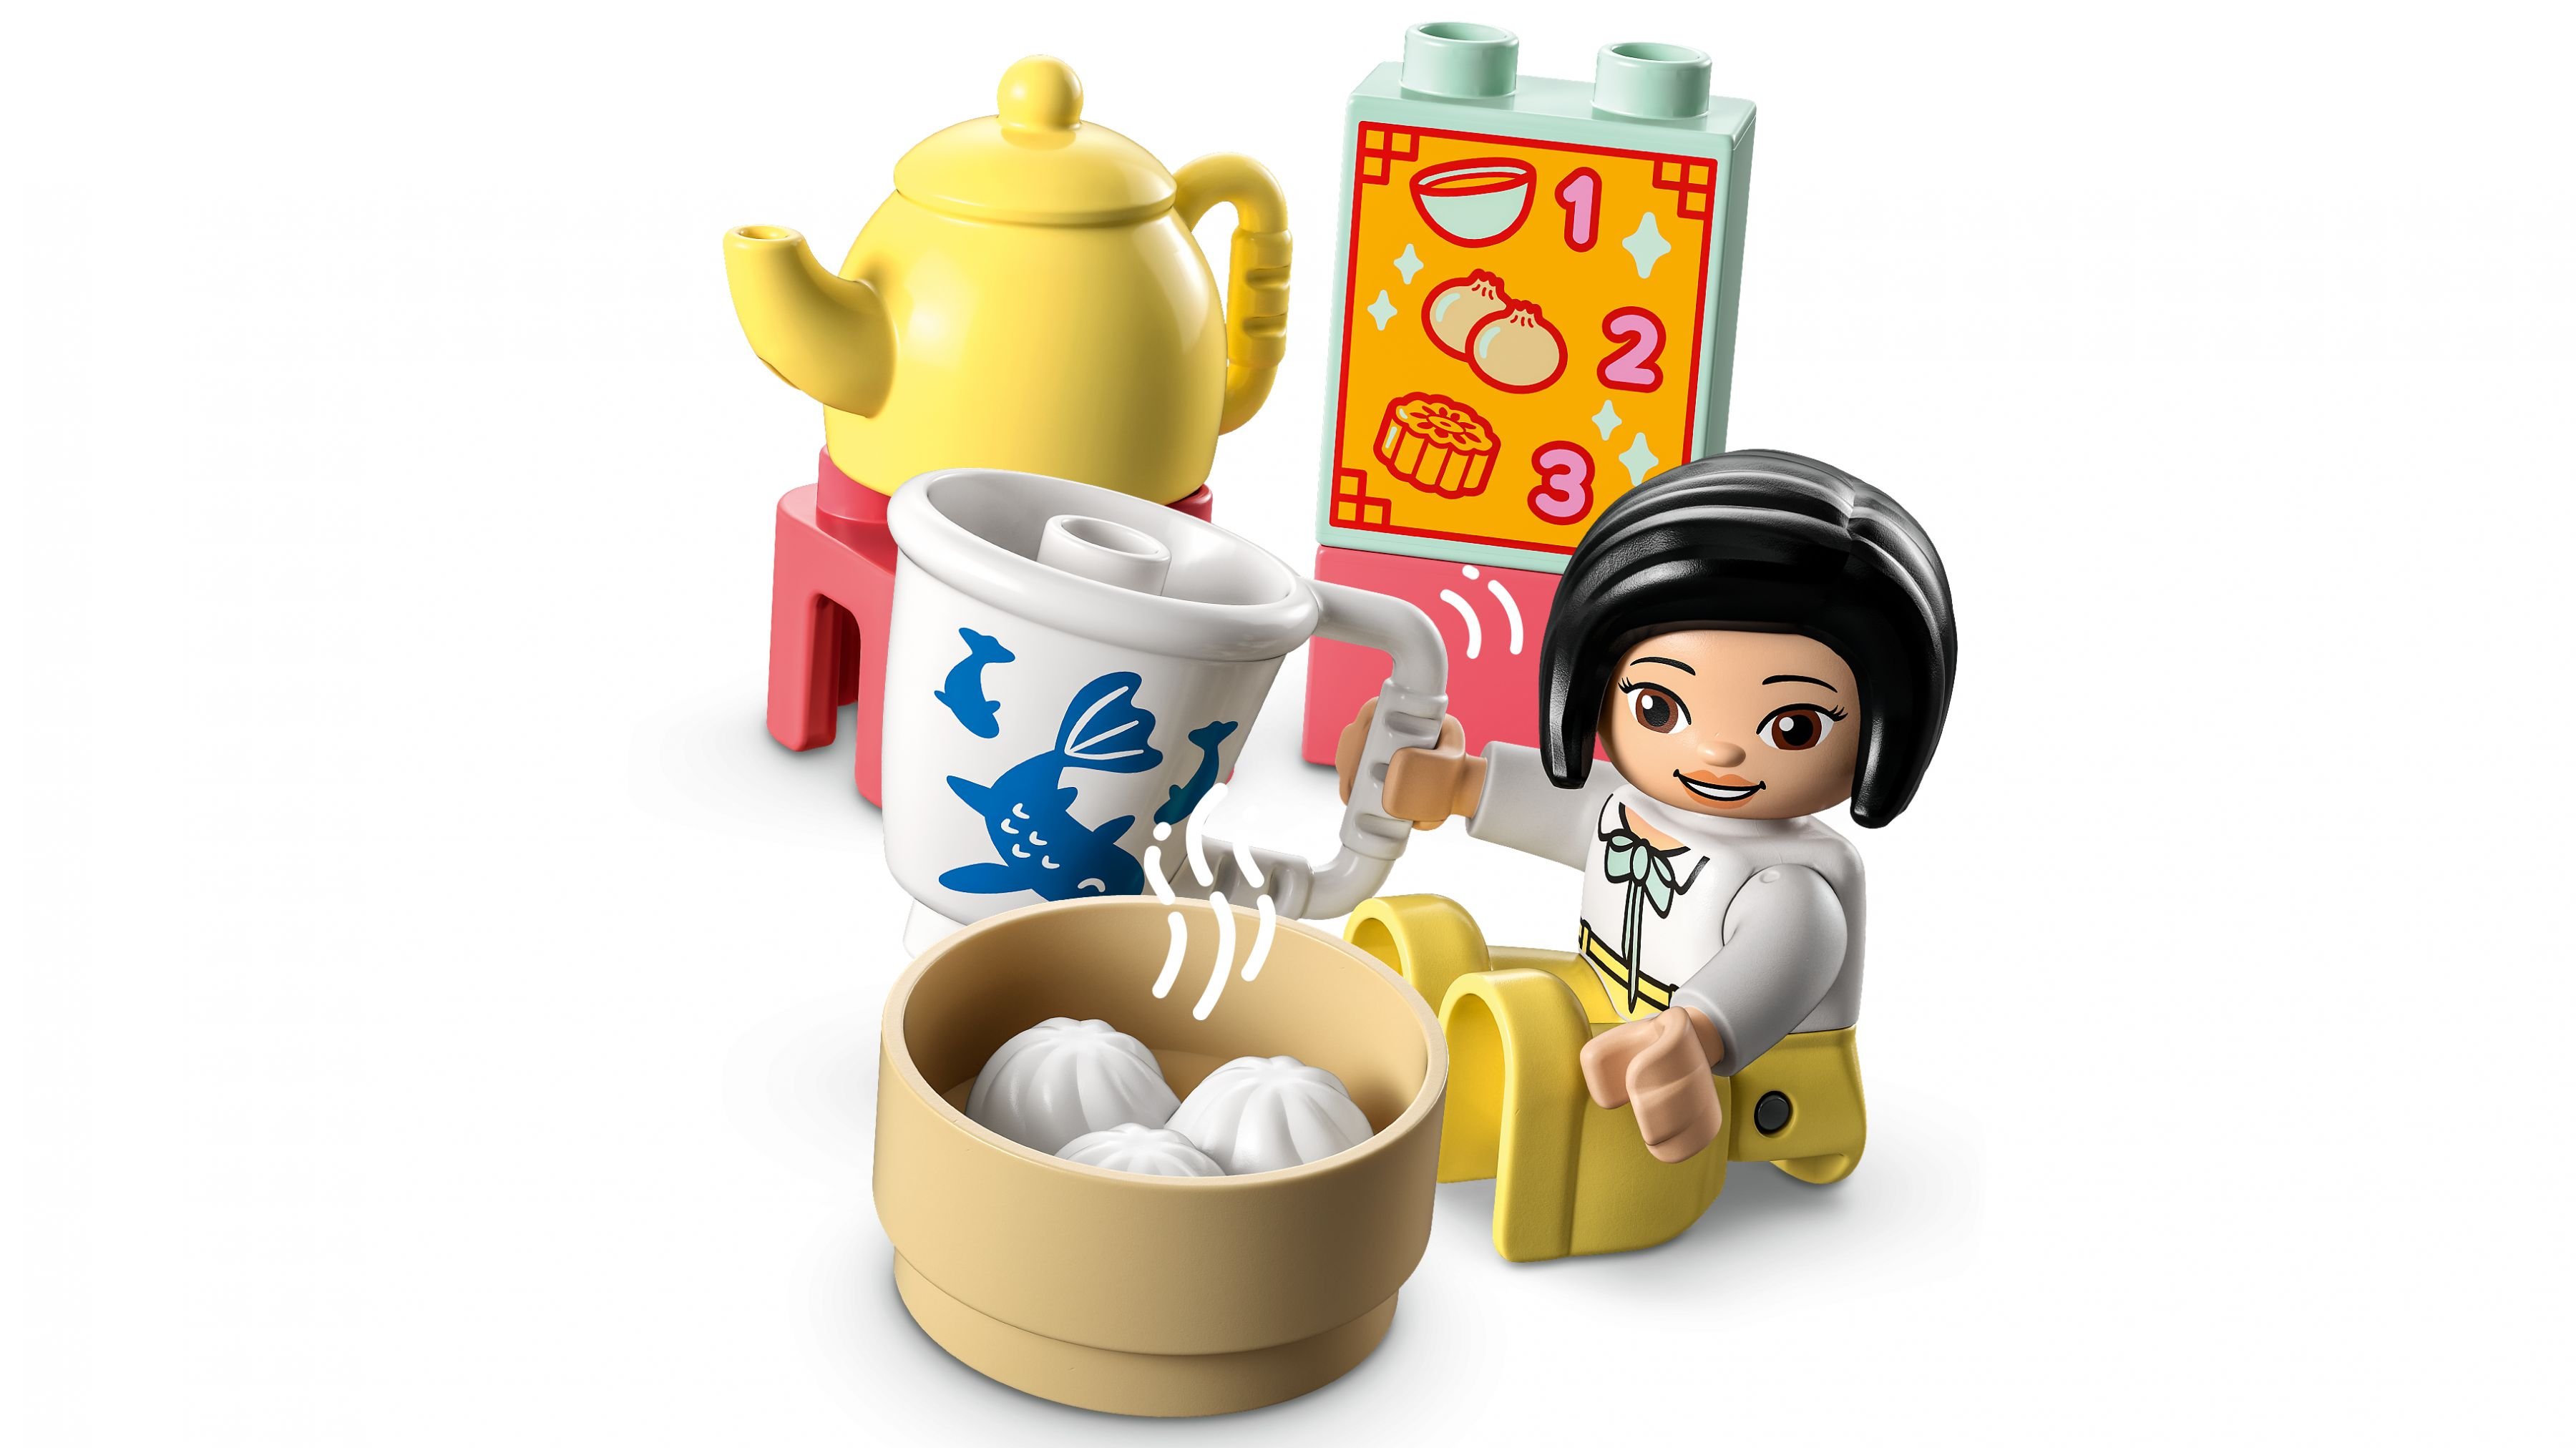 LEGO Duplo 10411 Learn about Chinese Culture LEGO_10411_WEB_SEC03_NOBG.jpg